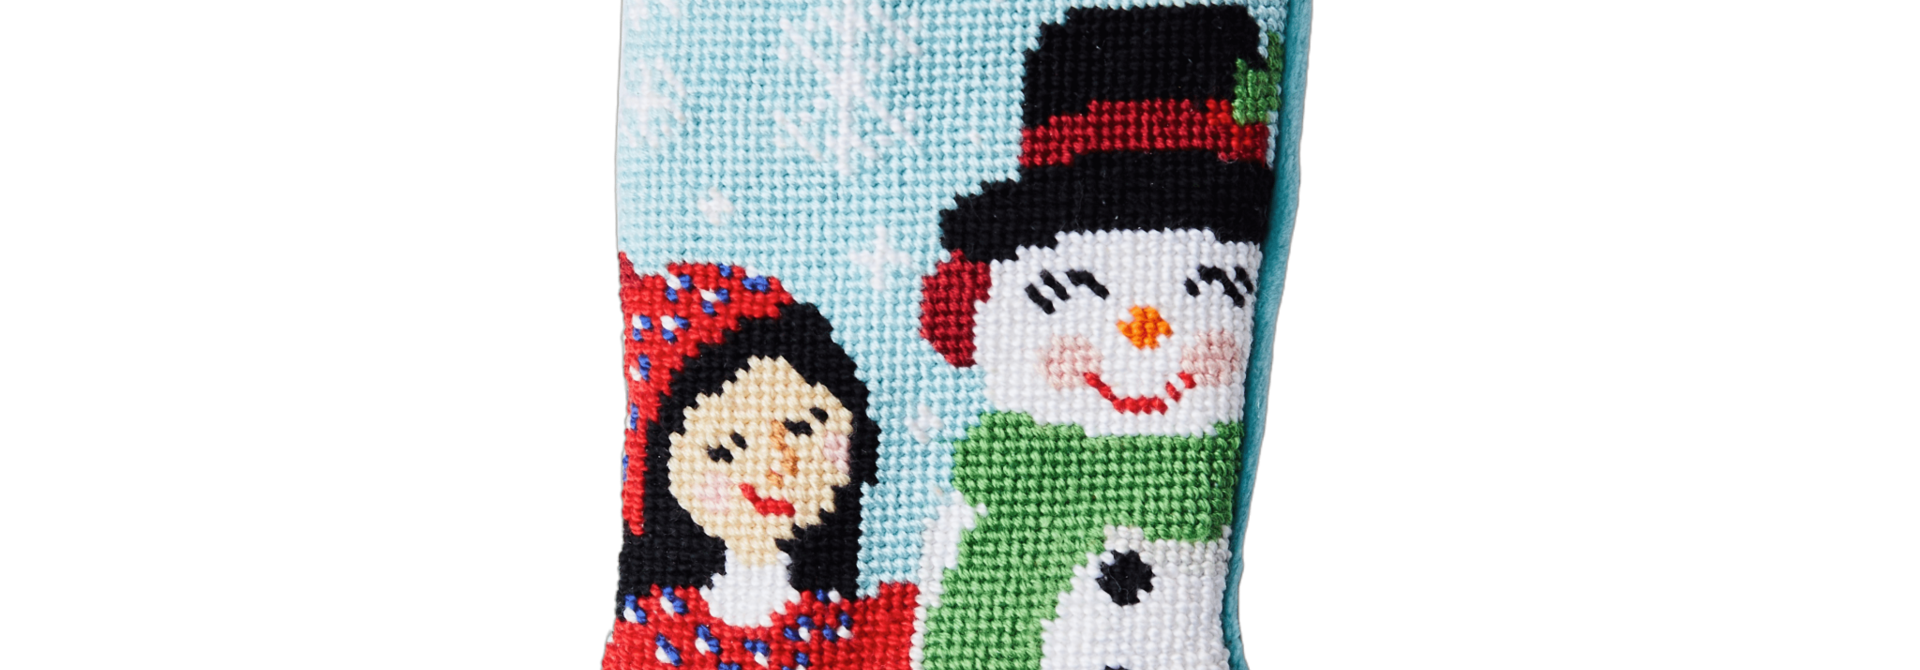 Friend of Frosty | The Bauble Stockings Collection - 4.25 Inch x 6 Inch